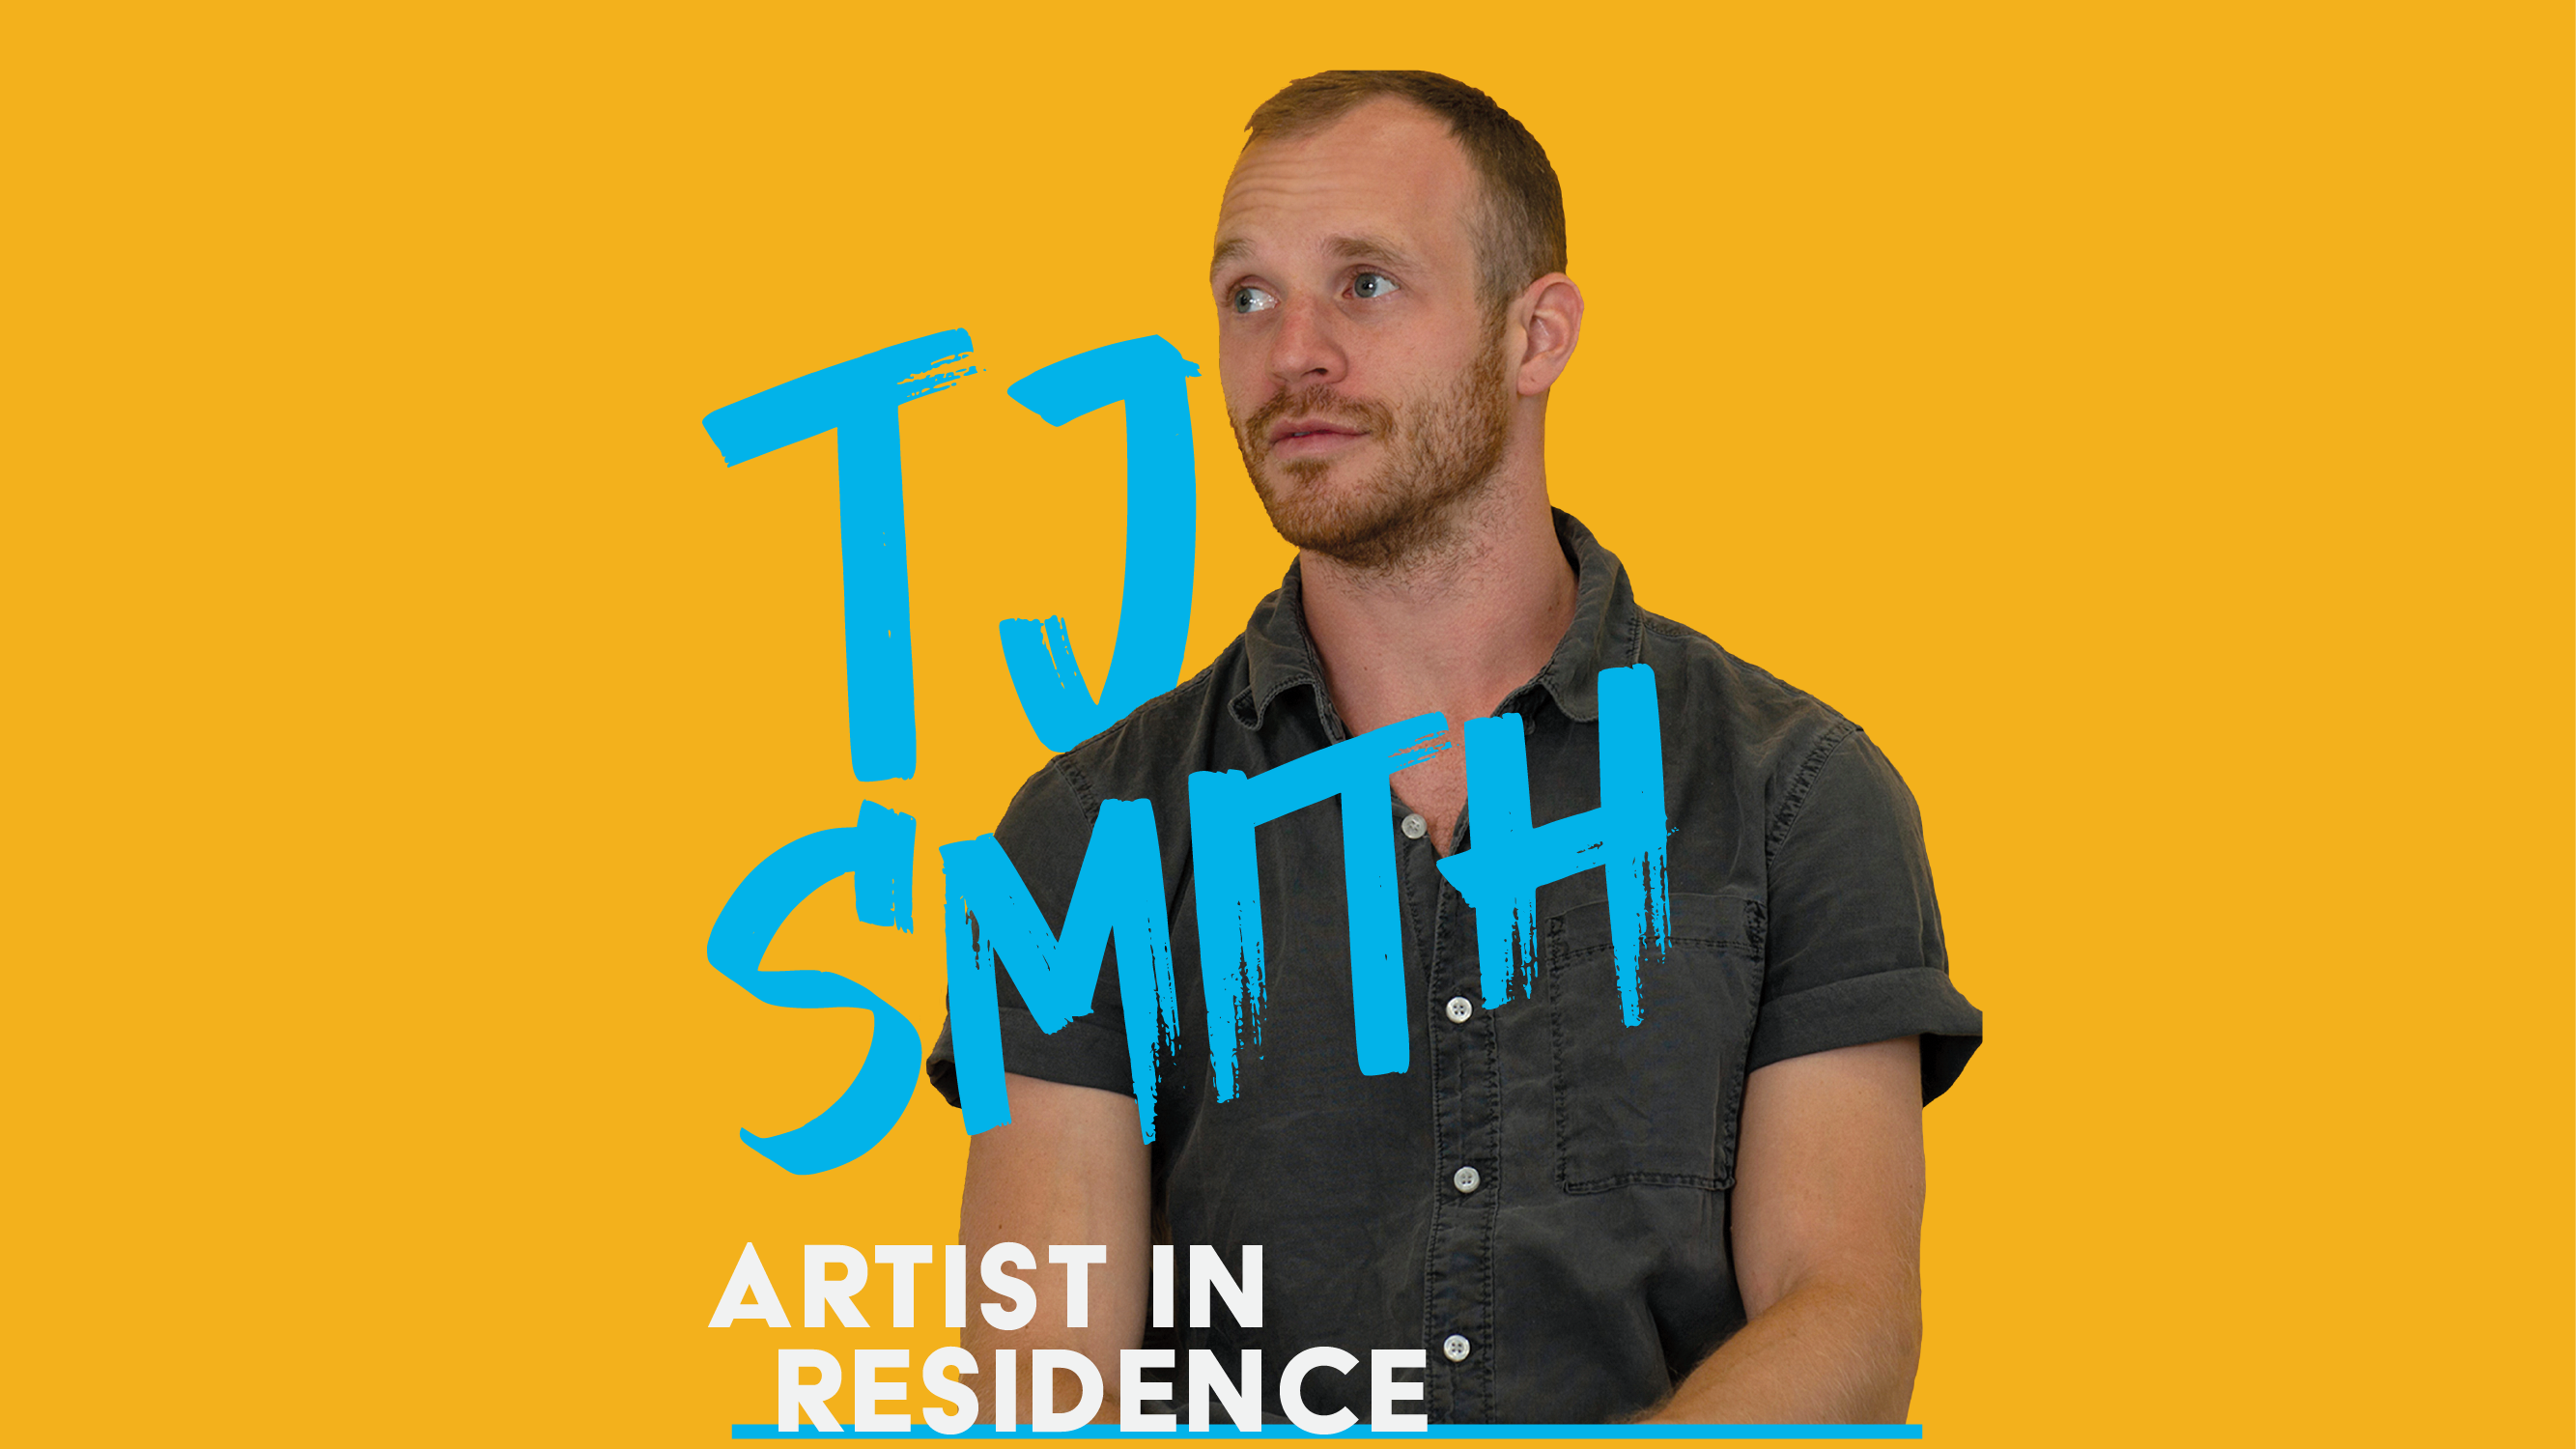 Artist in Residence: TJ Smith